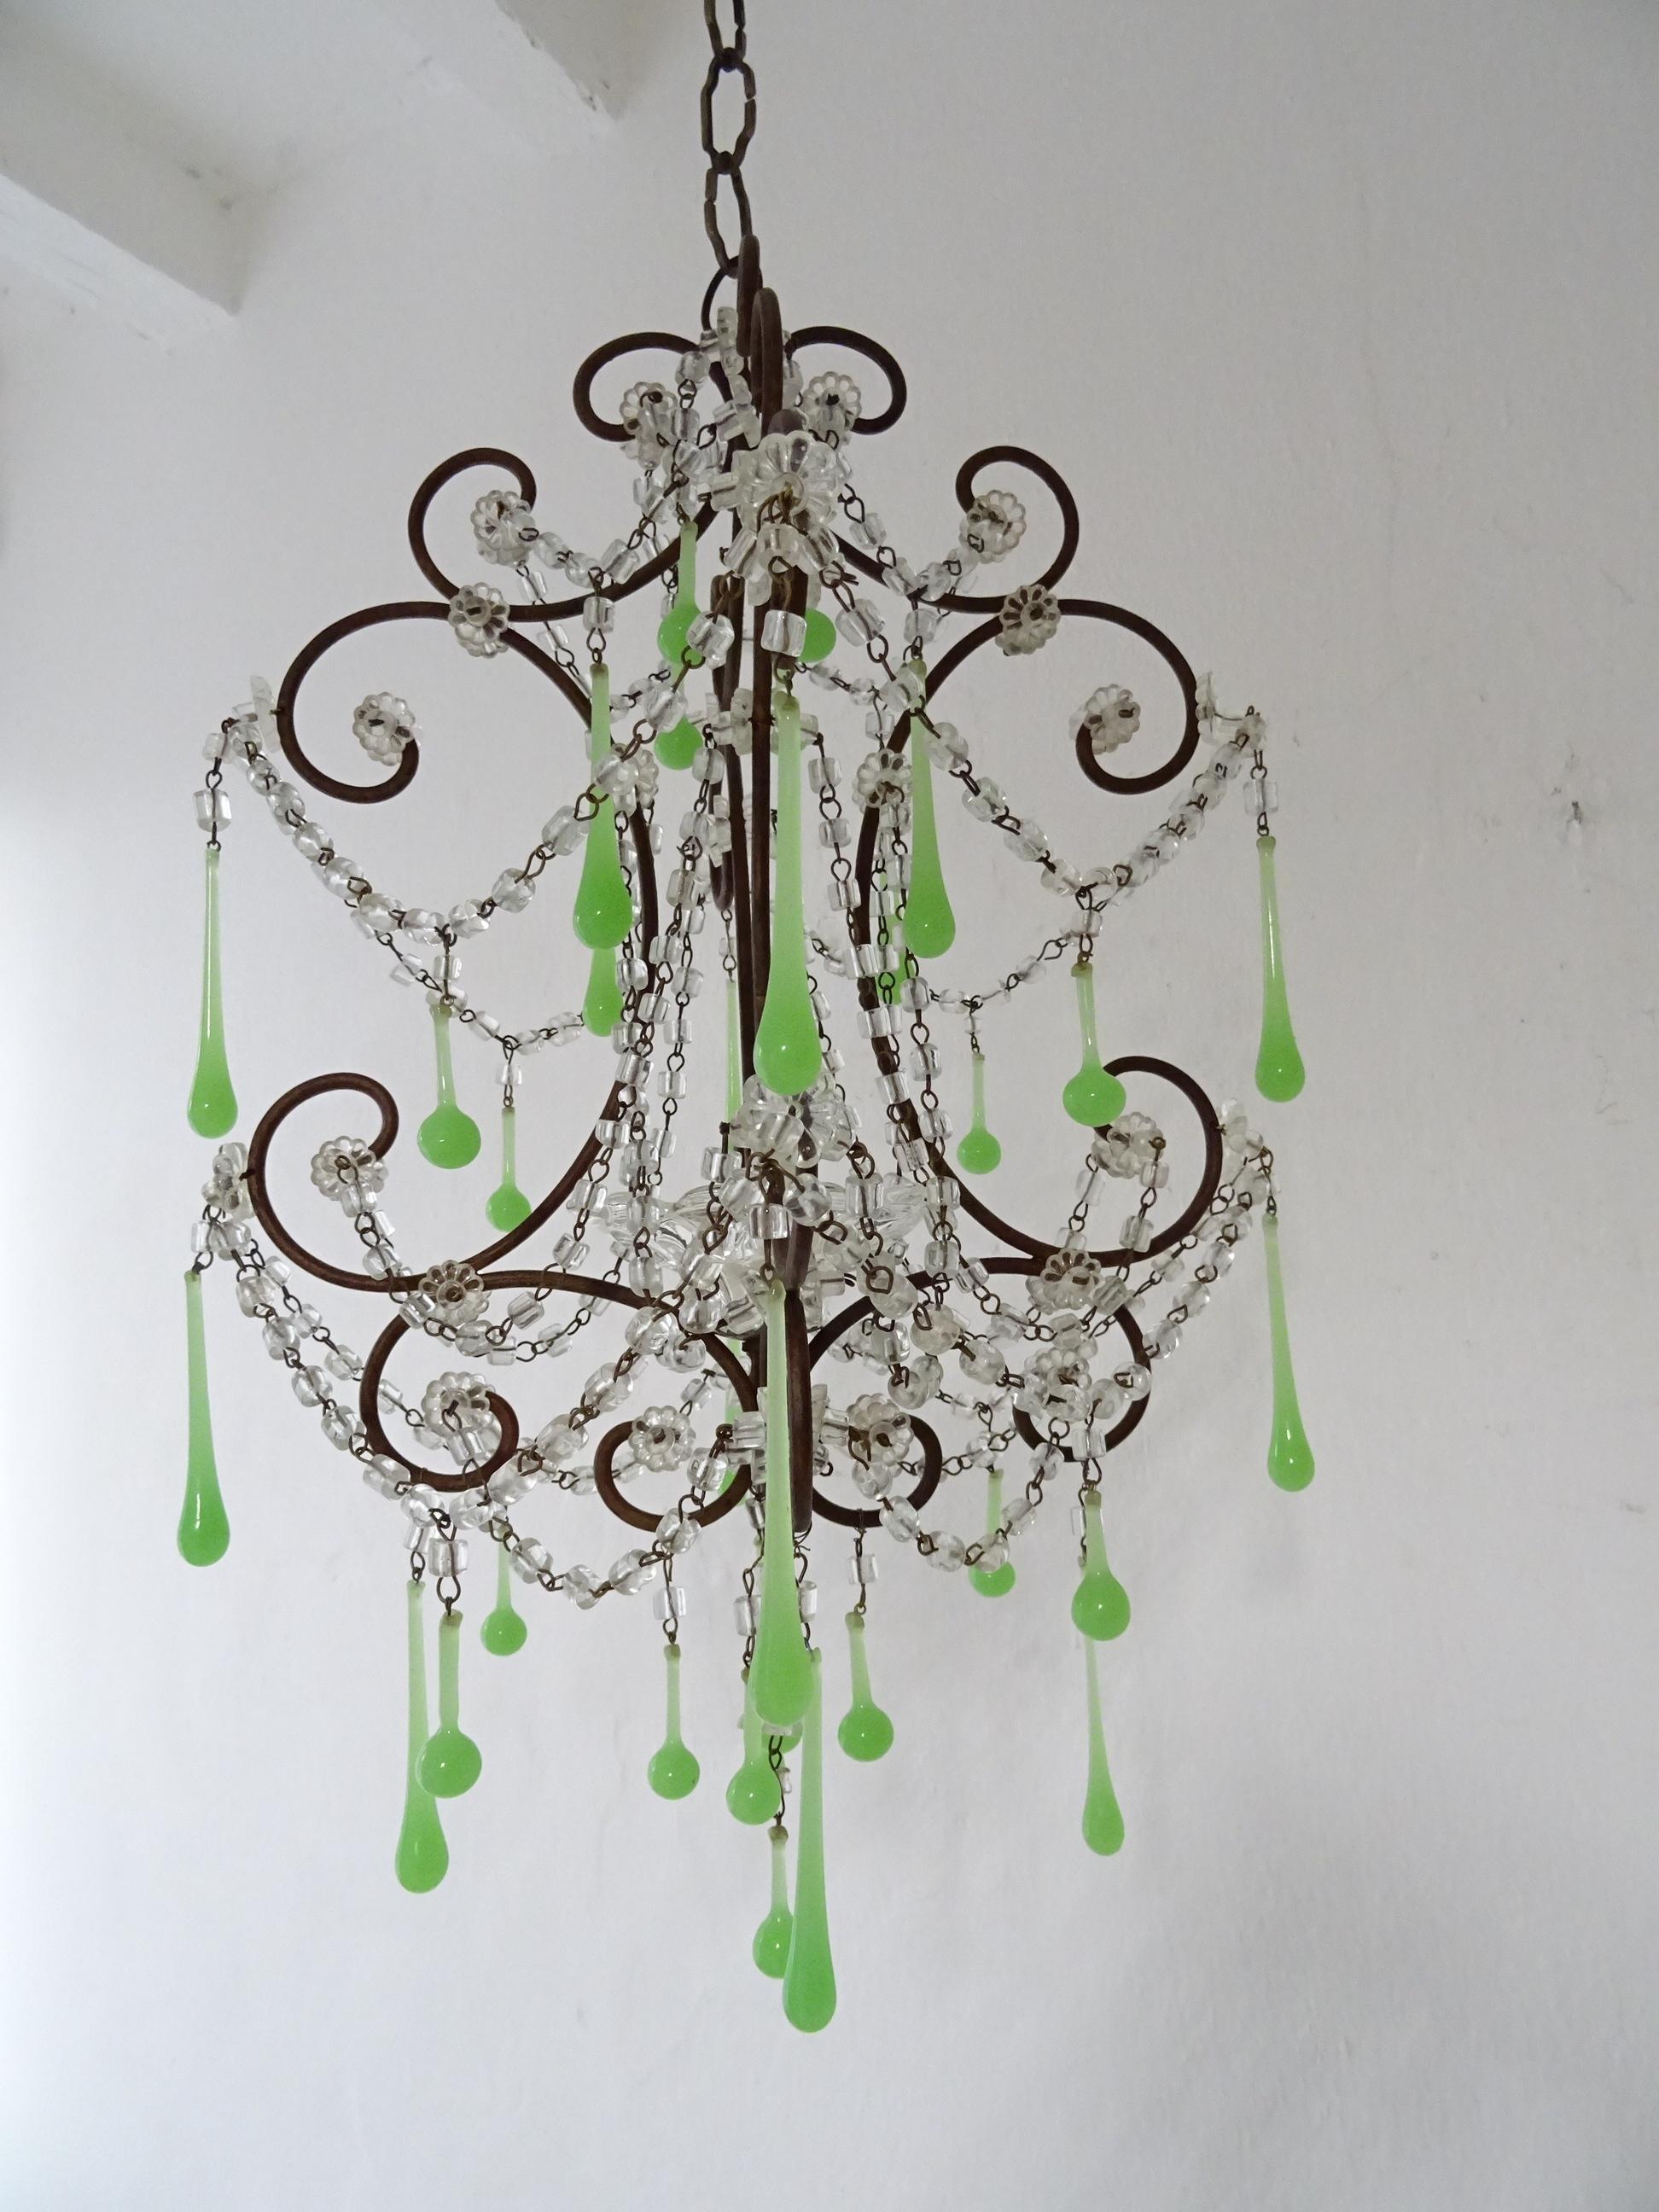 Housing one light in center in a rare shape bobeche. Will be rewired with a certified UL US socket for the USA and appropriate socket for all other countries and ready to hang. Swags of crystal macaroni and florets throughout. Adorning Murano green